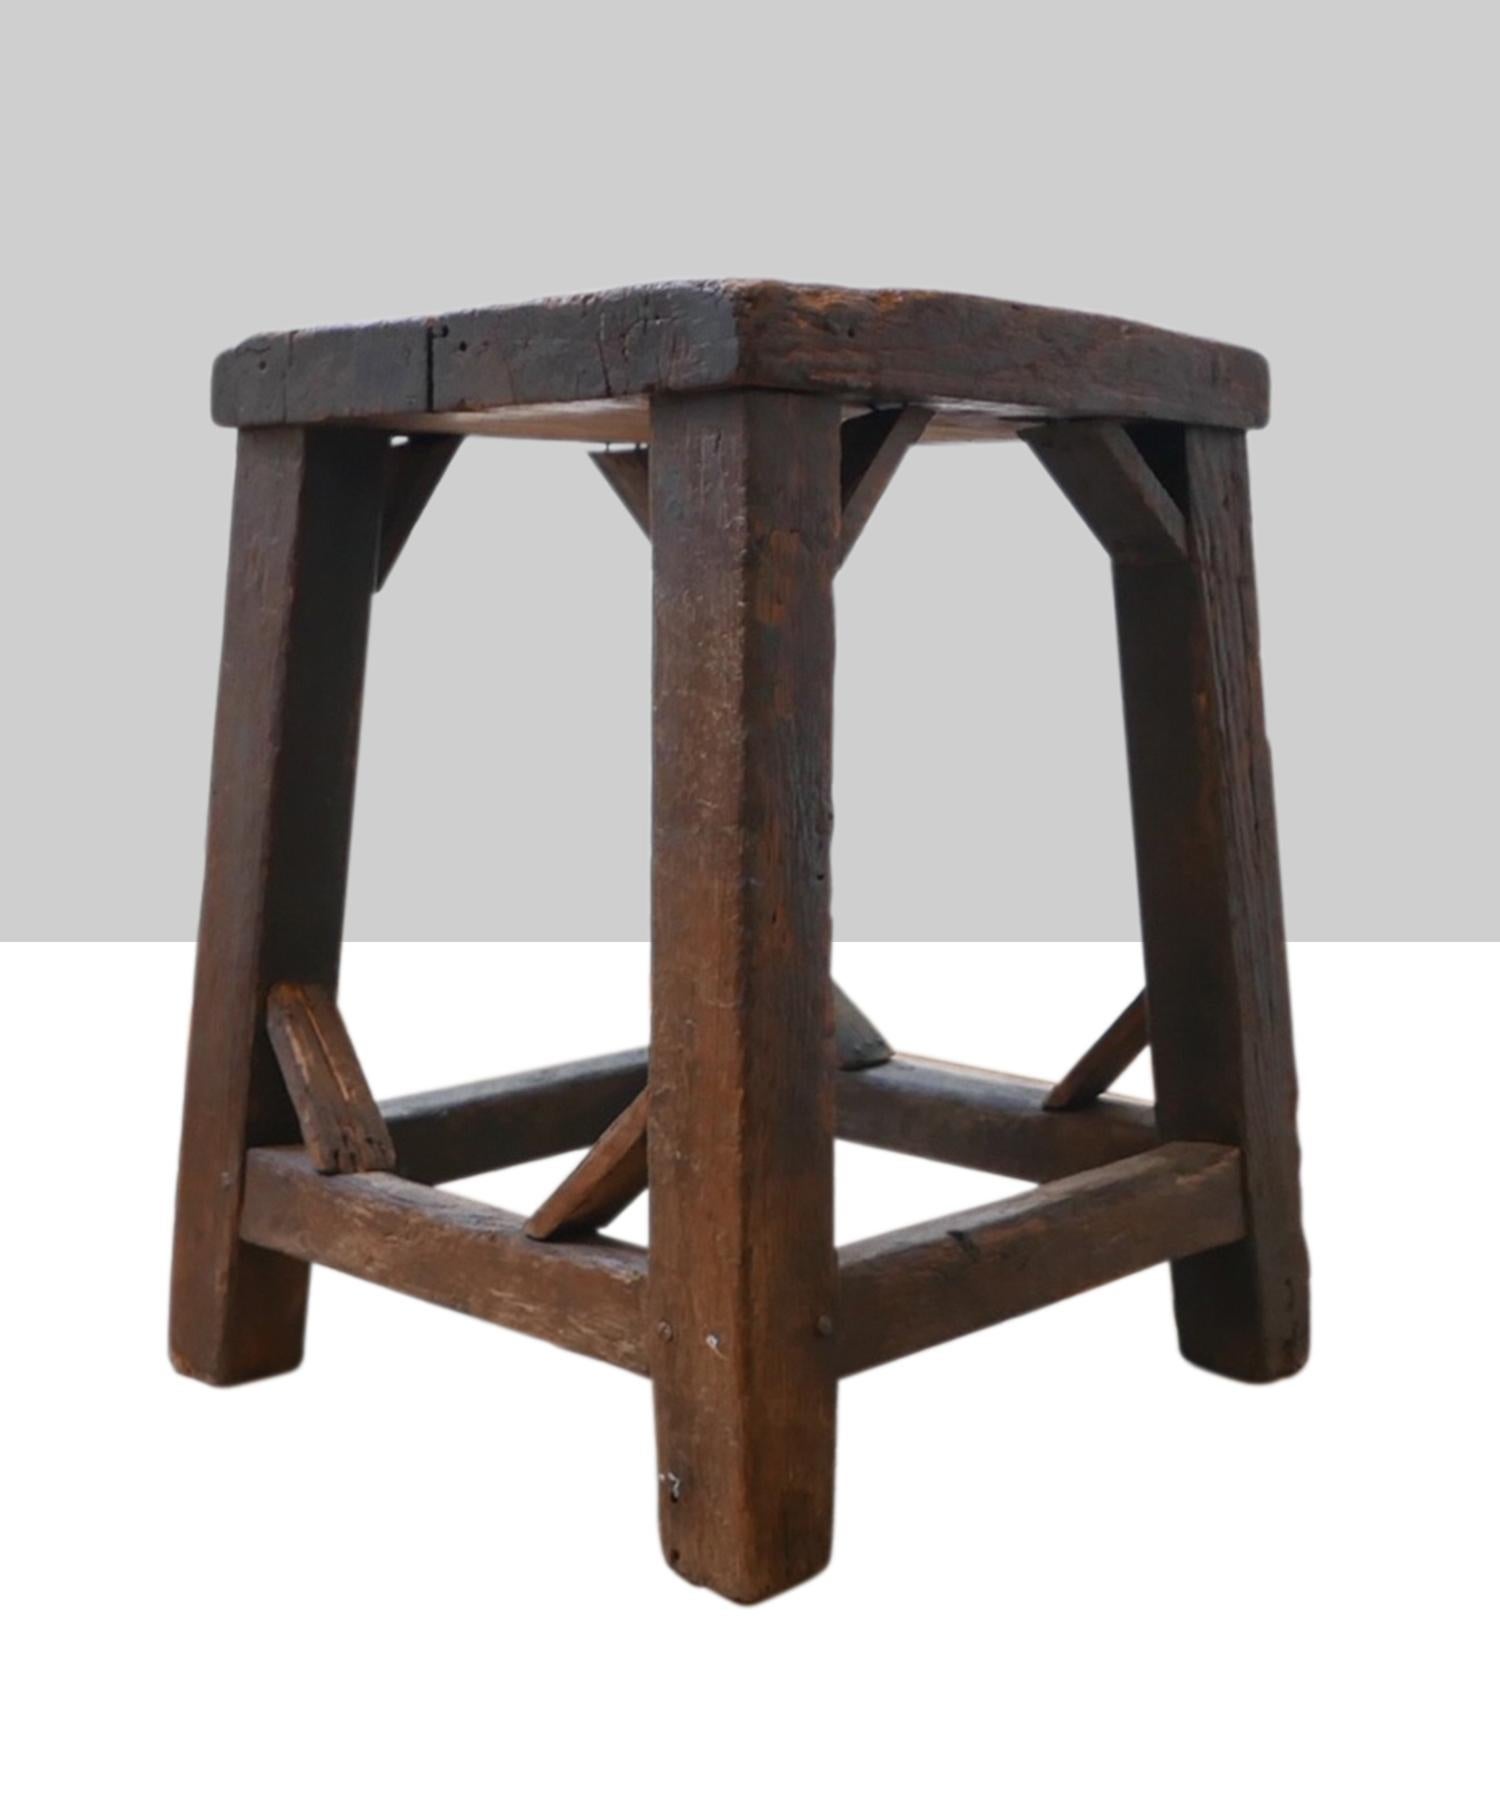 Primitive sculpture stand, France early 20th century.

Primitive stand, constructed in pine, with iron details, and stretcher supports.